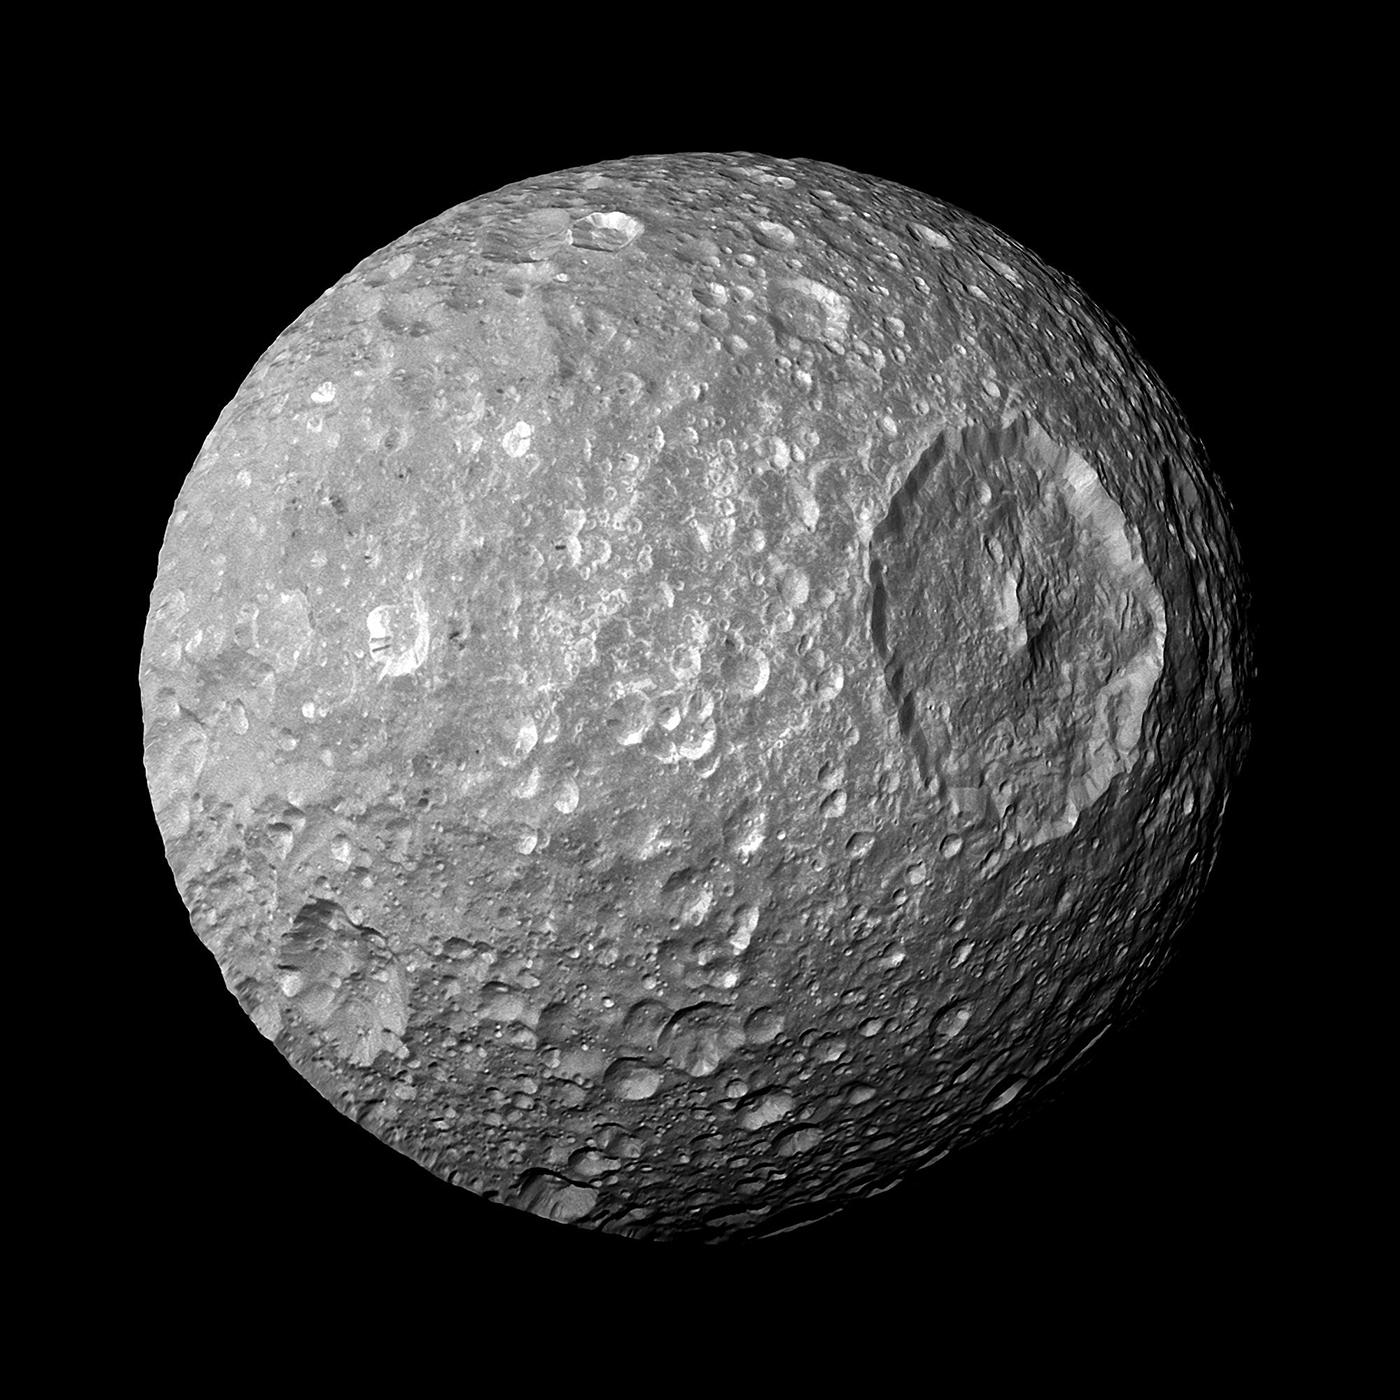 Saturn's moon Mimas looks like the Death Star from 'Star Wars.' Image: Courtesy NASA/JPL/Space Science Institute